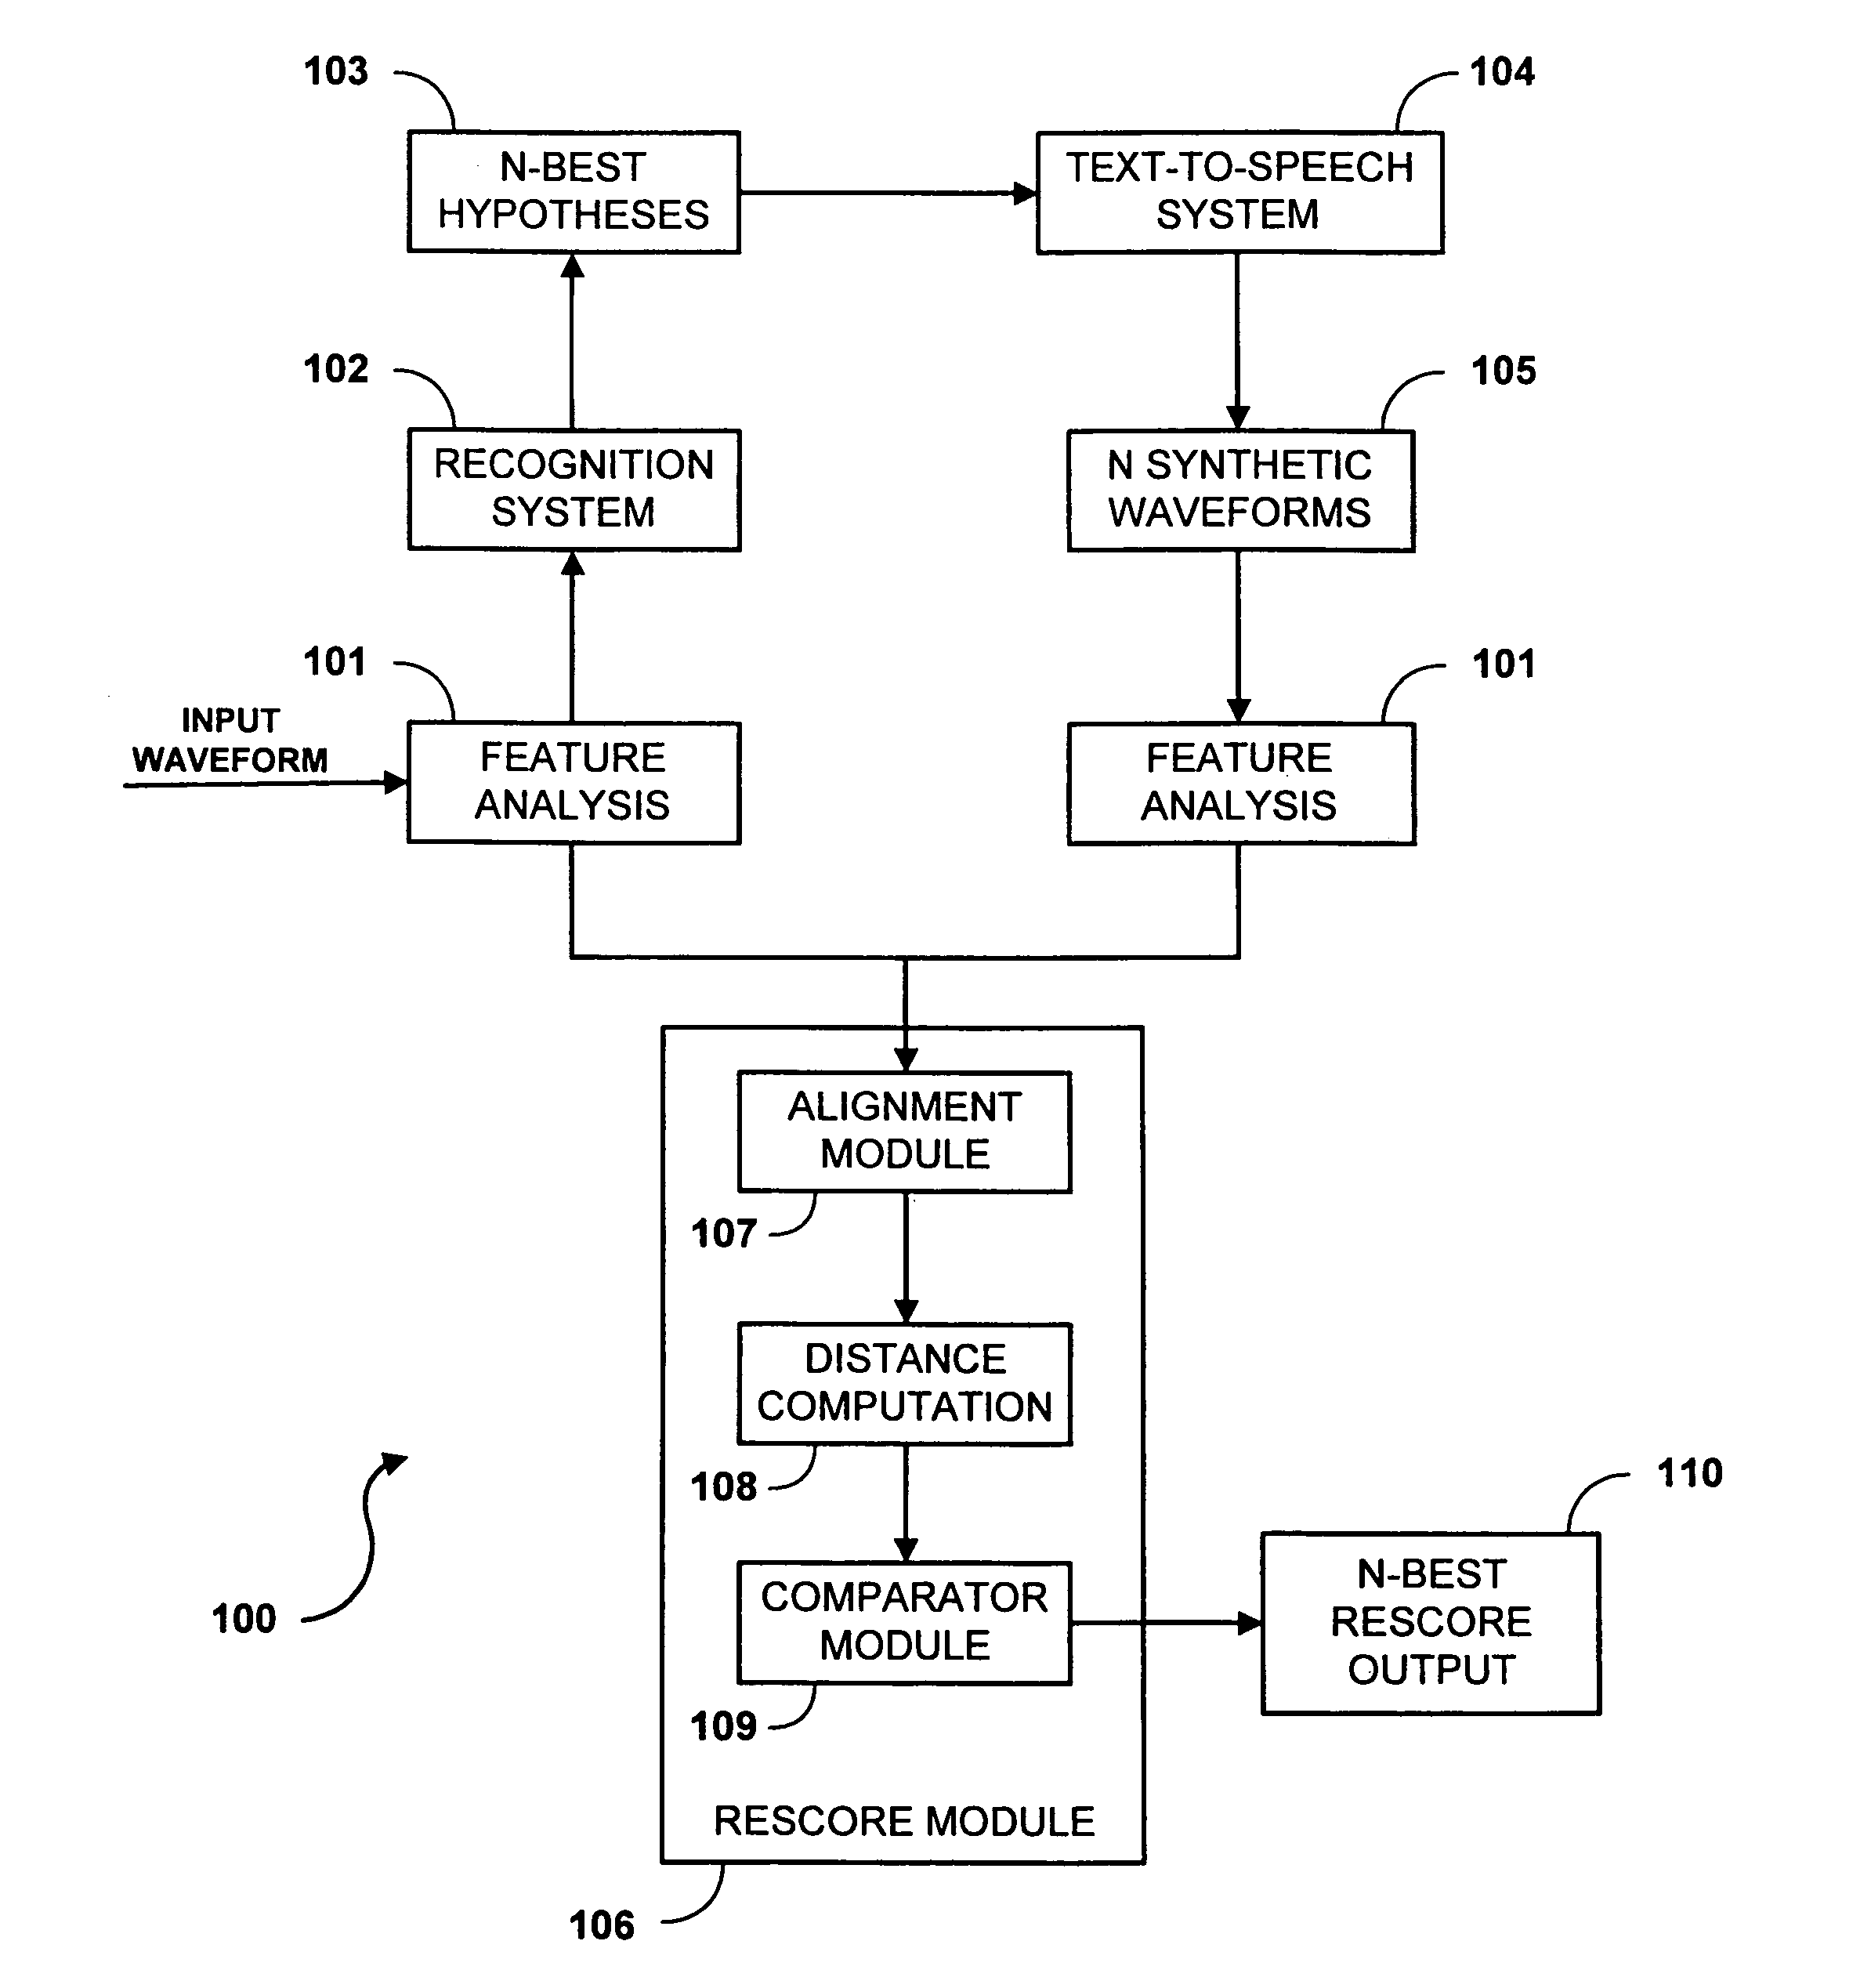 System and method for rescoring N-best hypotheses of an automatic speech recognition system